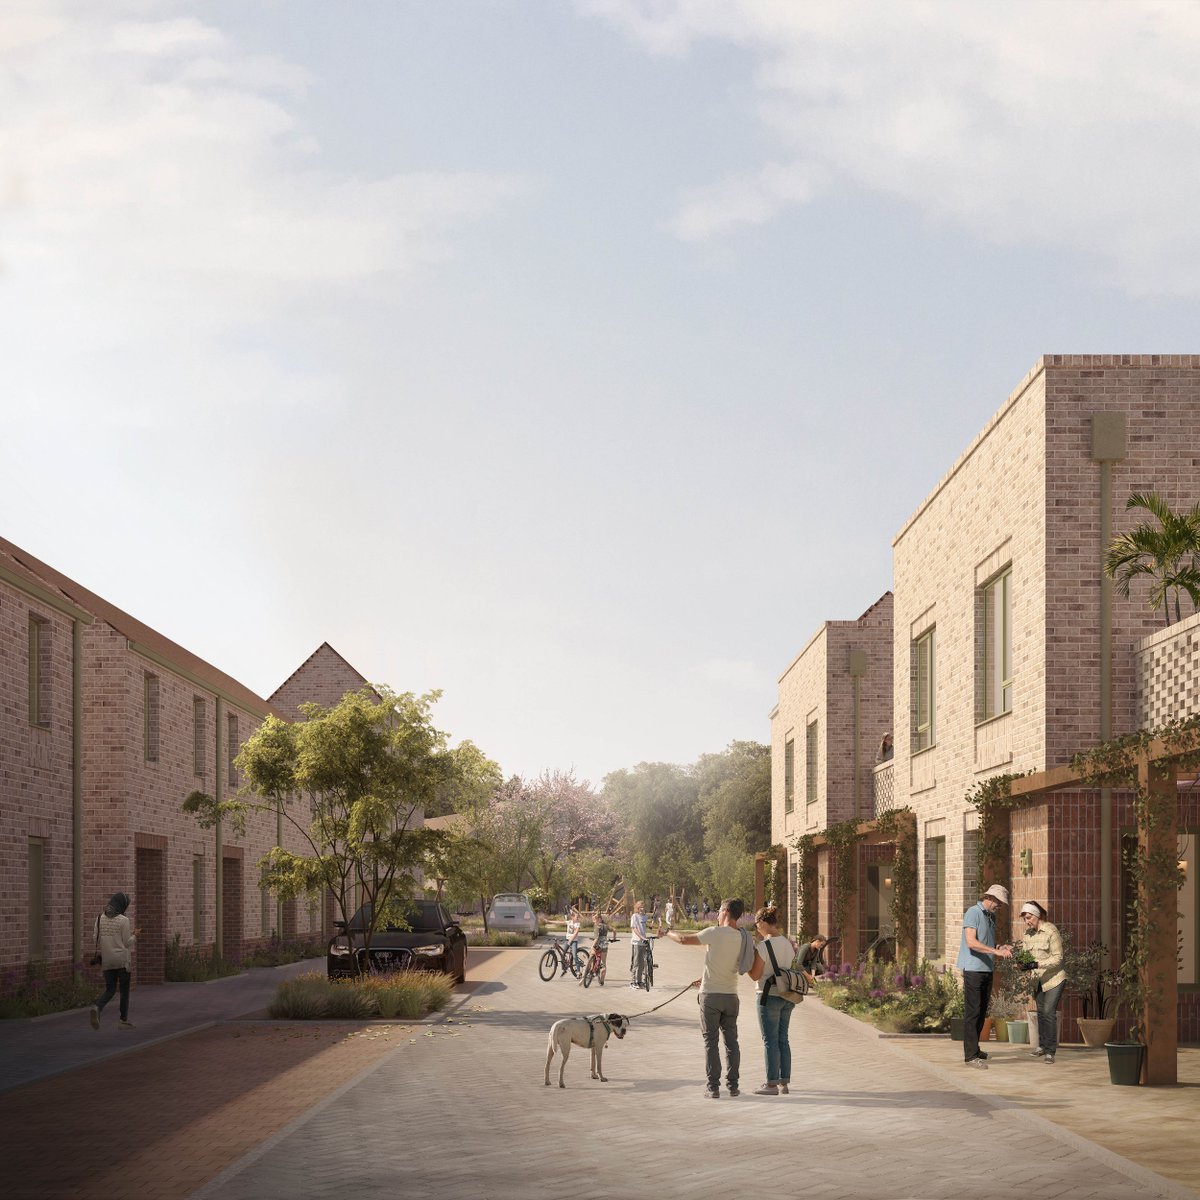 Weyside Urban Village Phase 1 is shortlisted at the #HousingDesignAwards! An exemplar for local authority-led housing with @GuildfordBC, Phase 1 features 81 dwellings designed to achieve #Passivhaus standards, setting a new benchmark for sustainable, future-proofed homes.